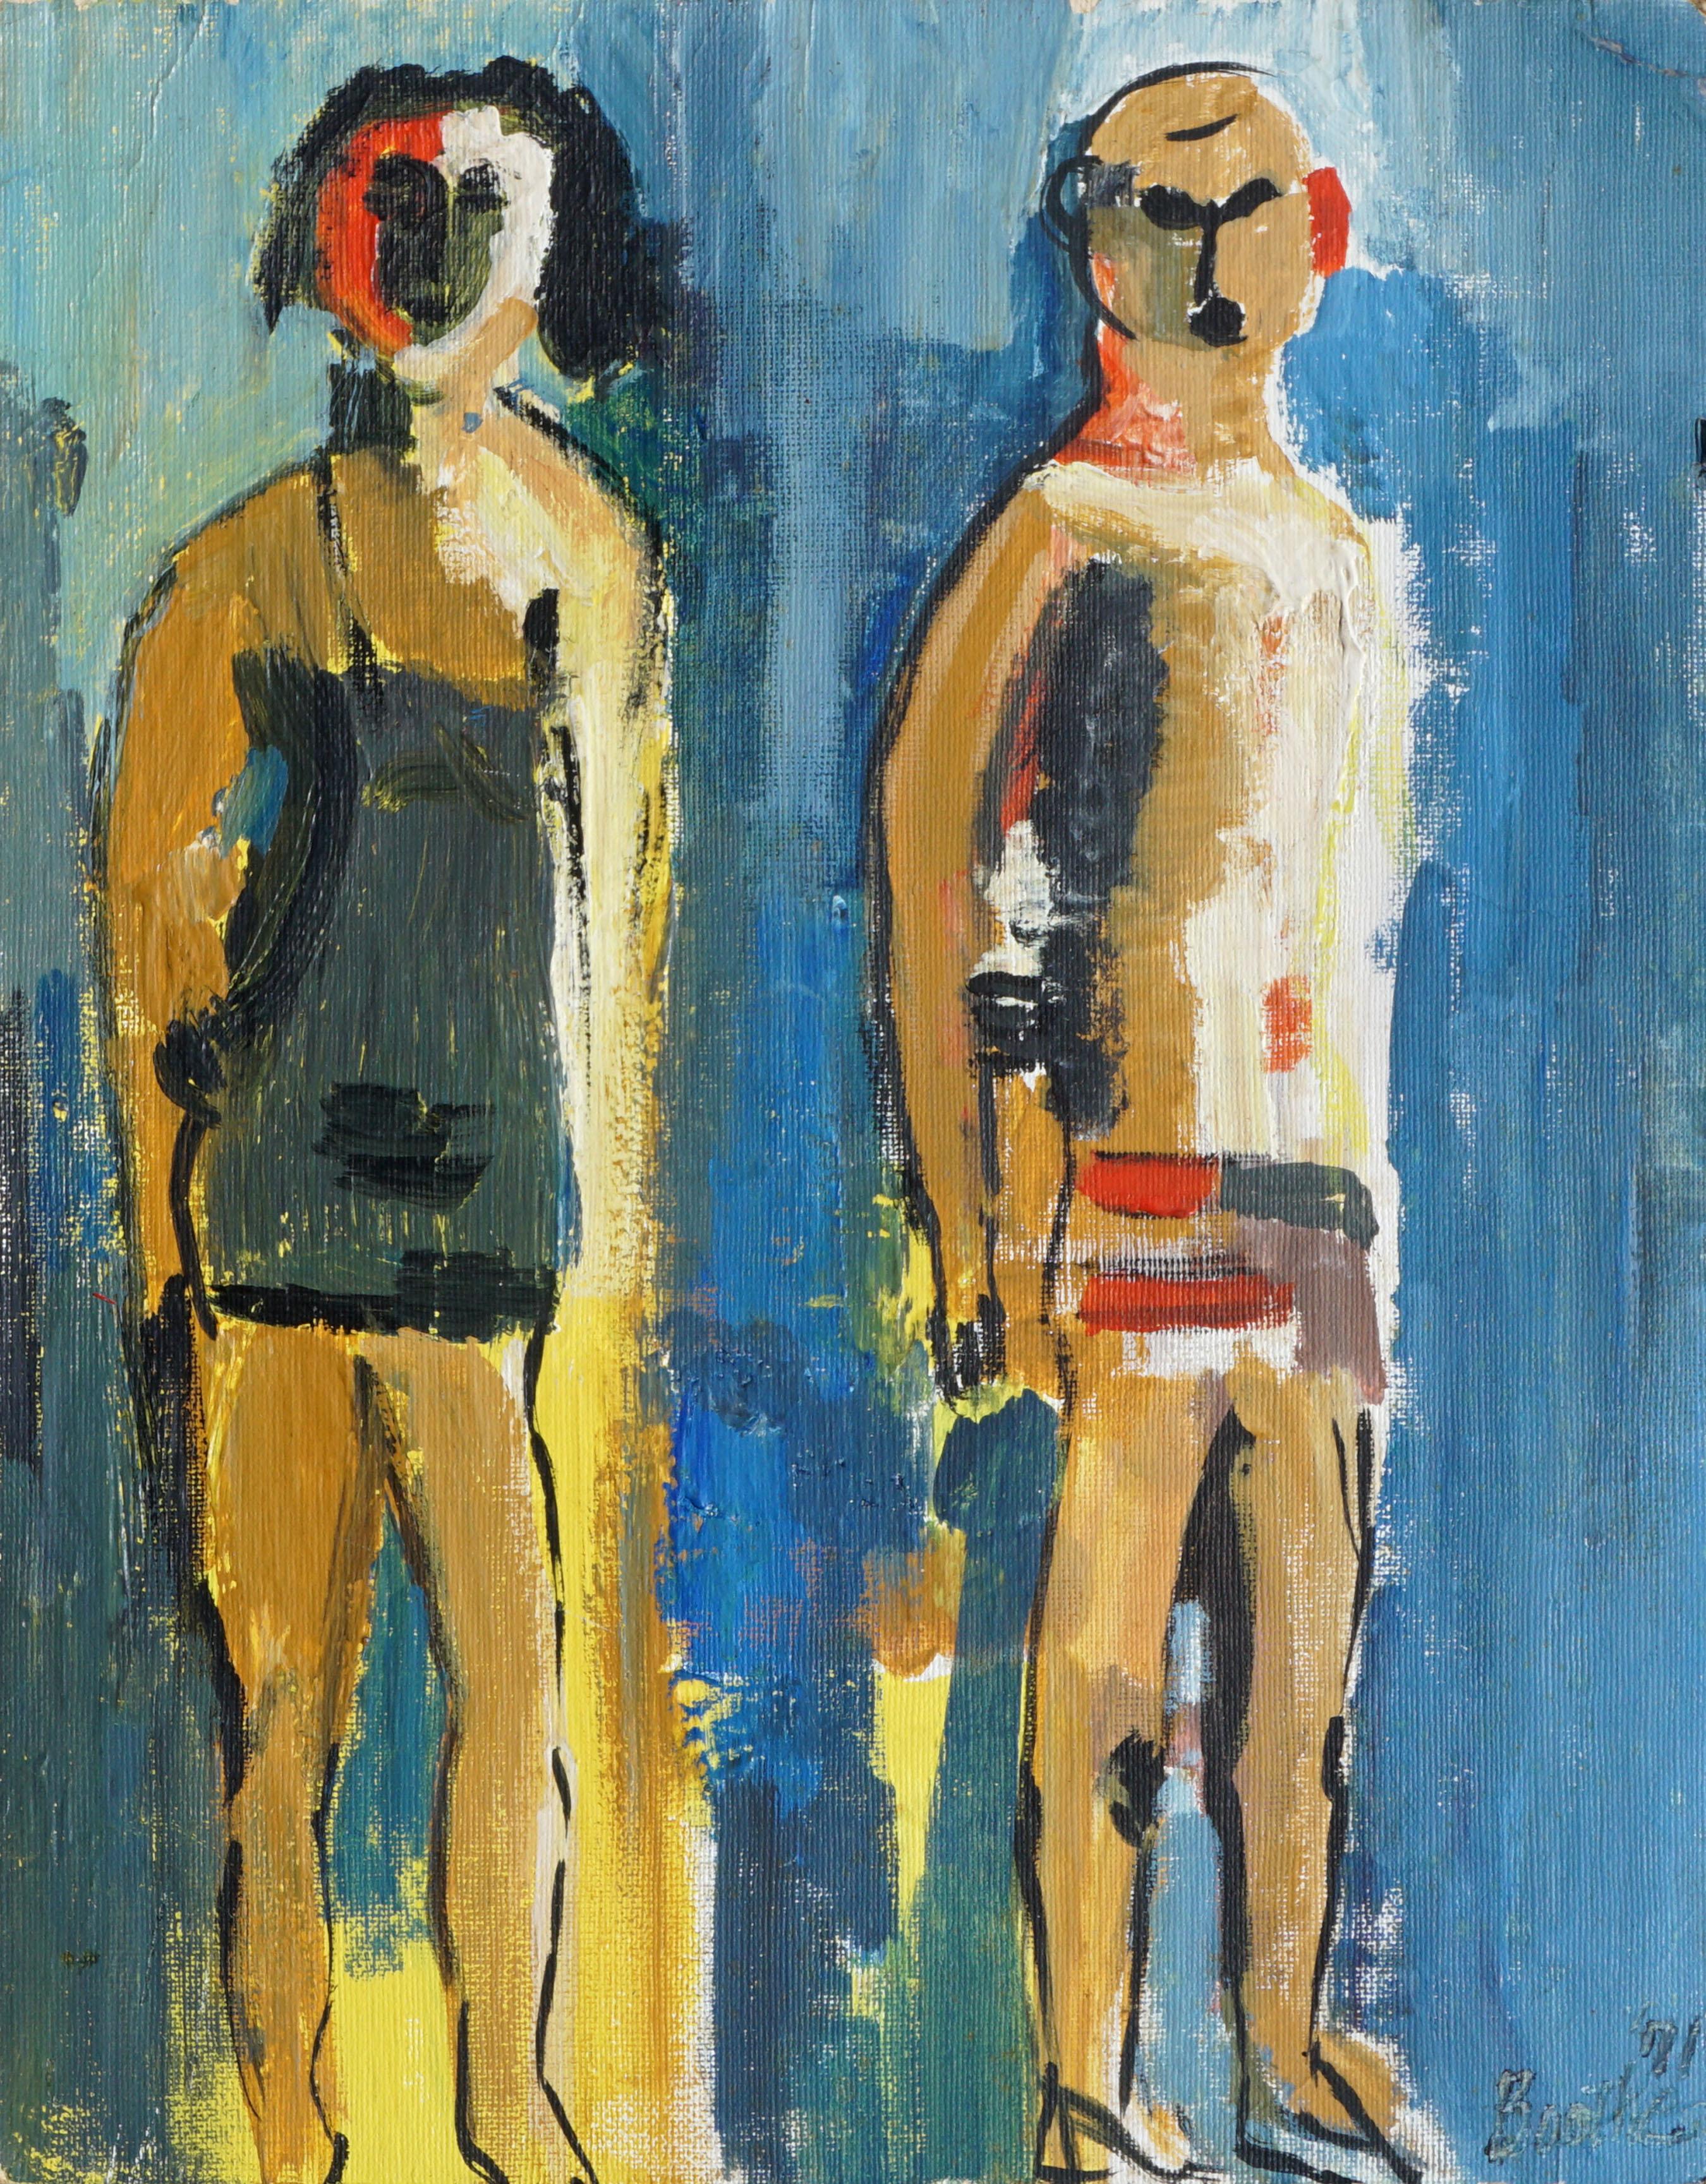 Bathing Suit Couple, Bay Area Figurative Abstract In Style of David Park